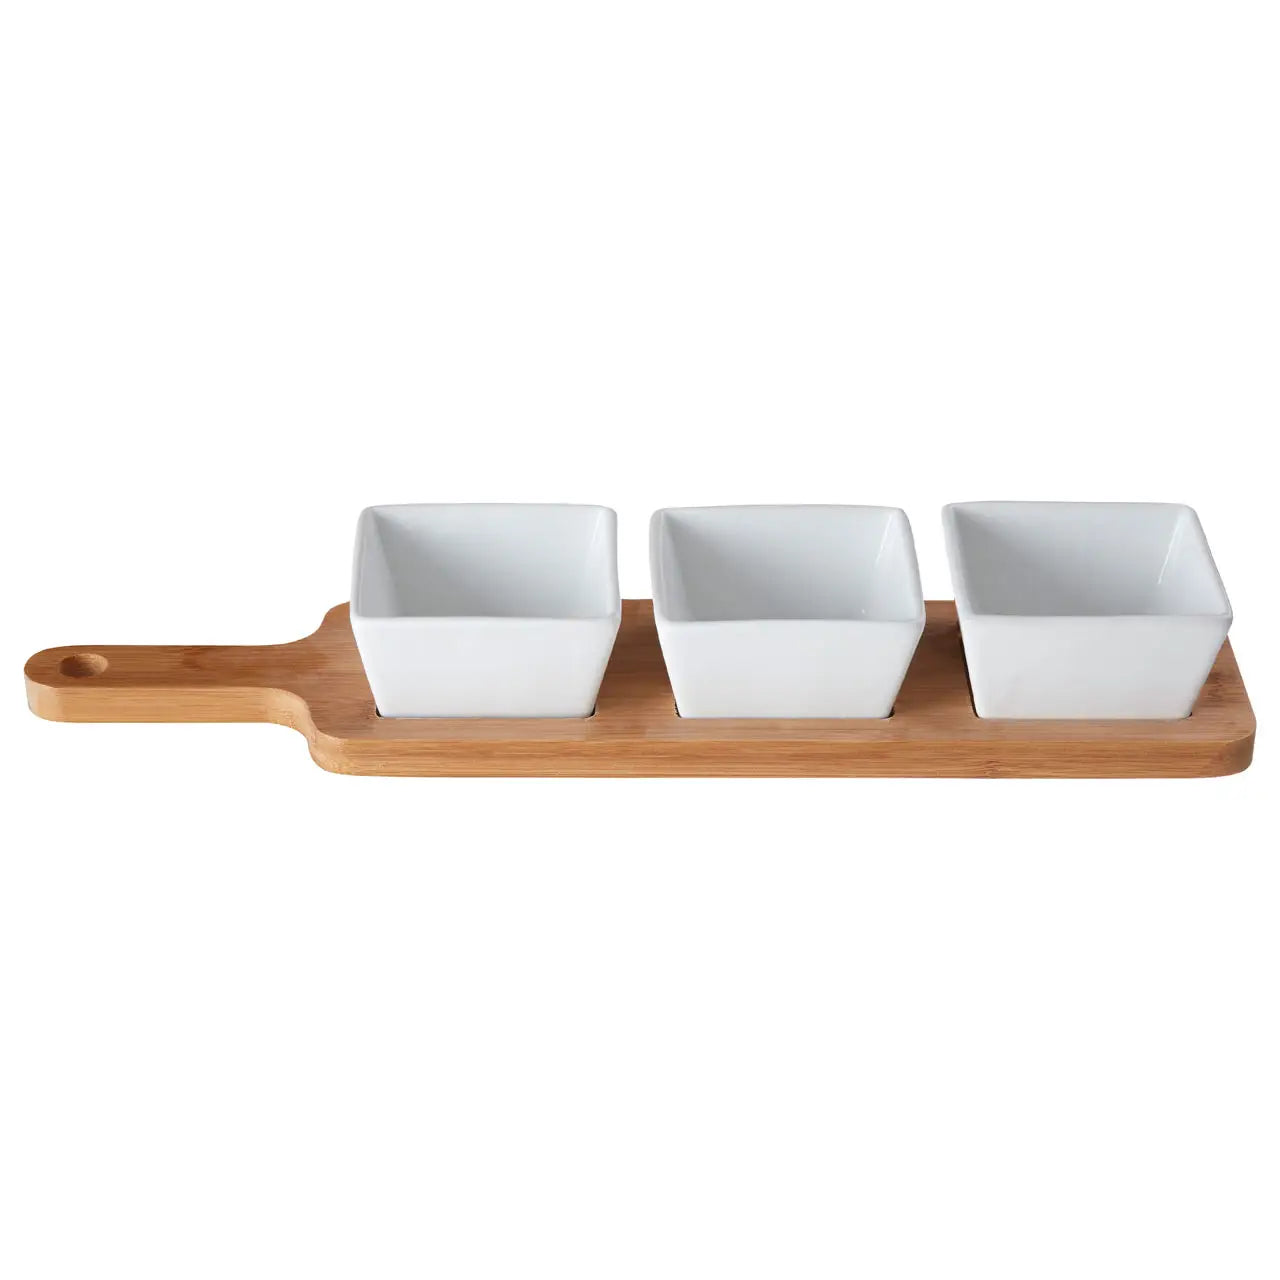 Serving Board with White Dip Bowls